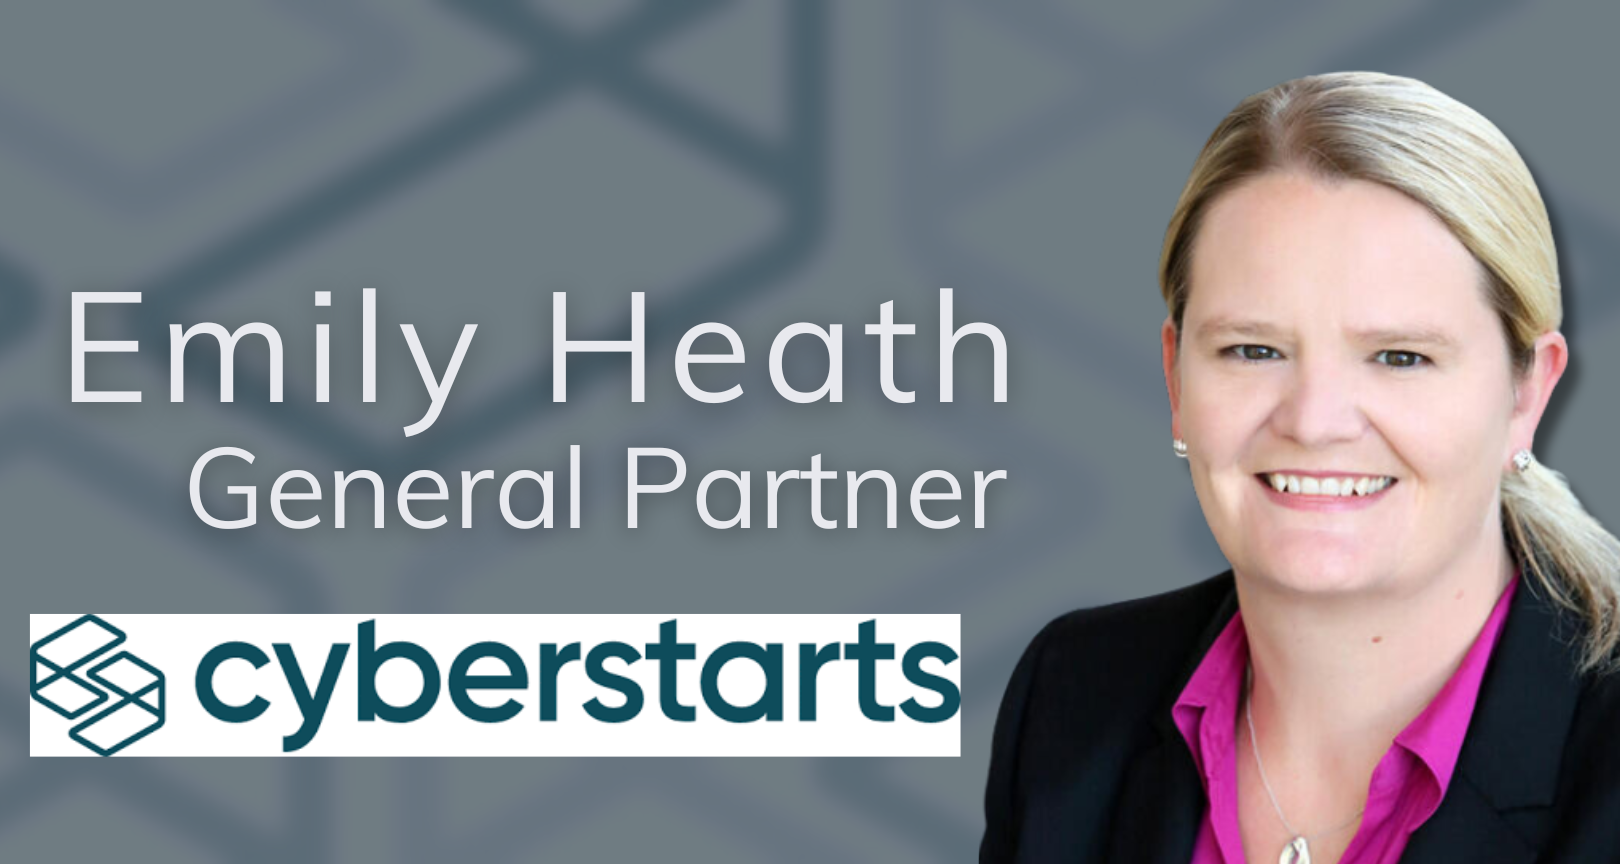 Delivering Visionary Leadership at the Board and C-level: Emily Heath, General Partner, Cyberstarts